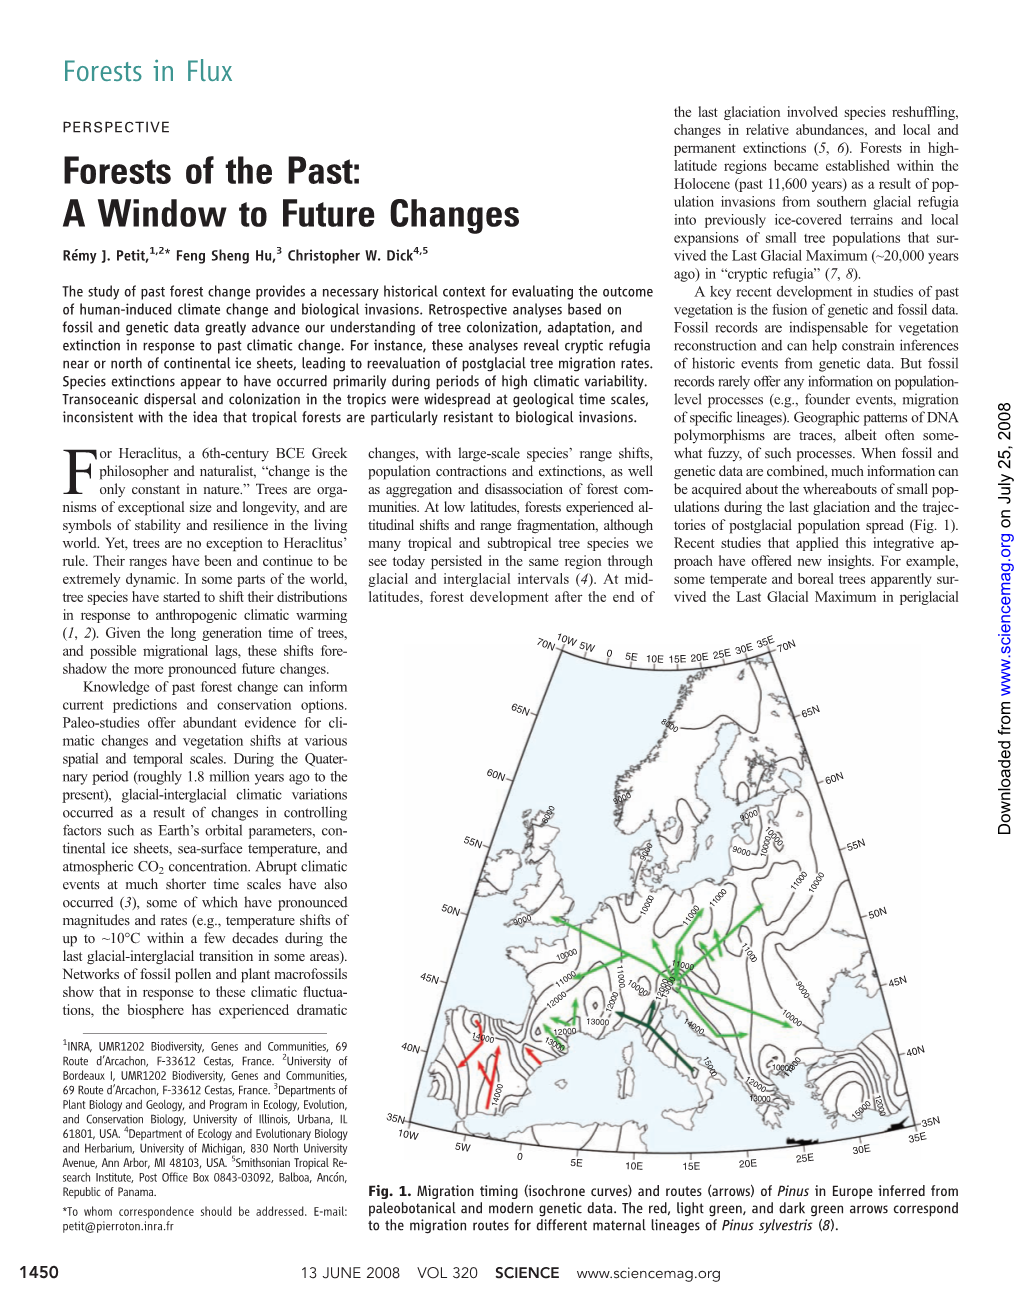 Forests of the Past: a Window to Future Changes